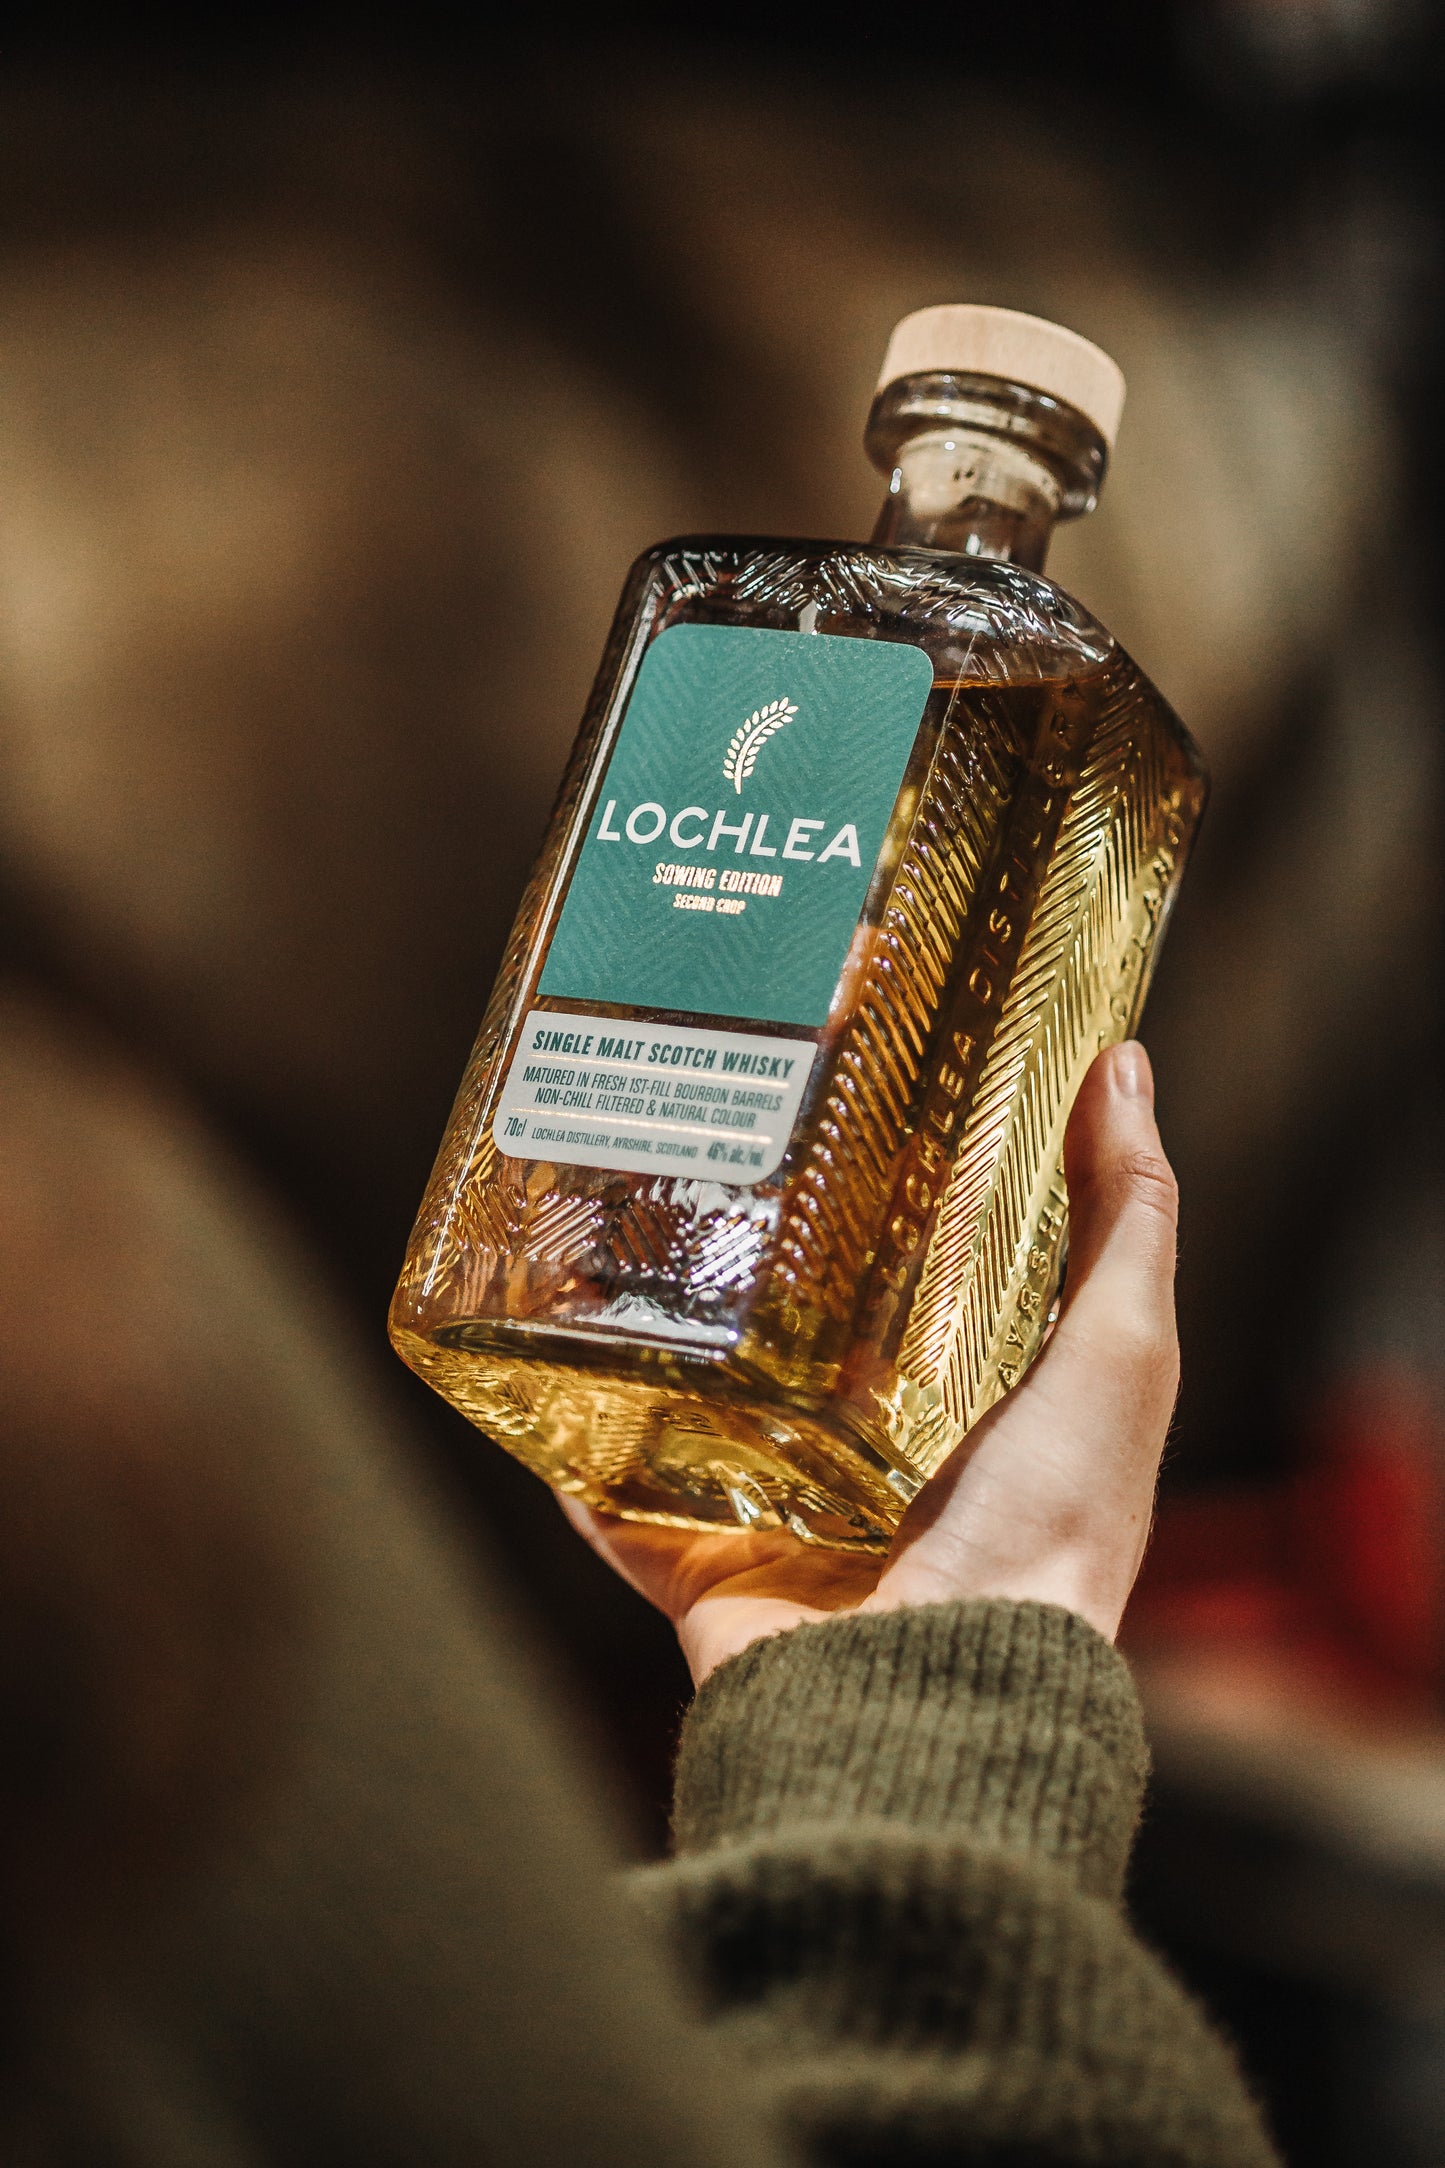 Lochlea Sowing Edition "Second Crop" Crop Single Malt Whisky (70cl, 46%)